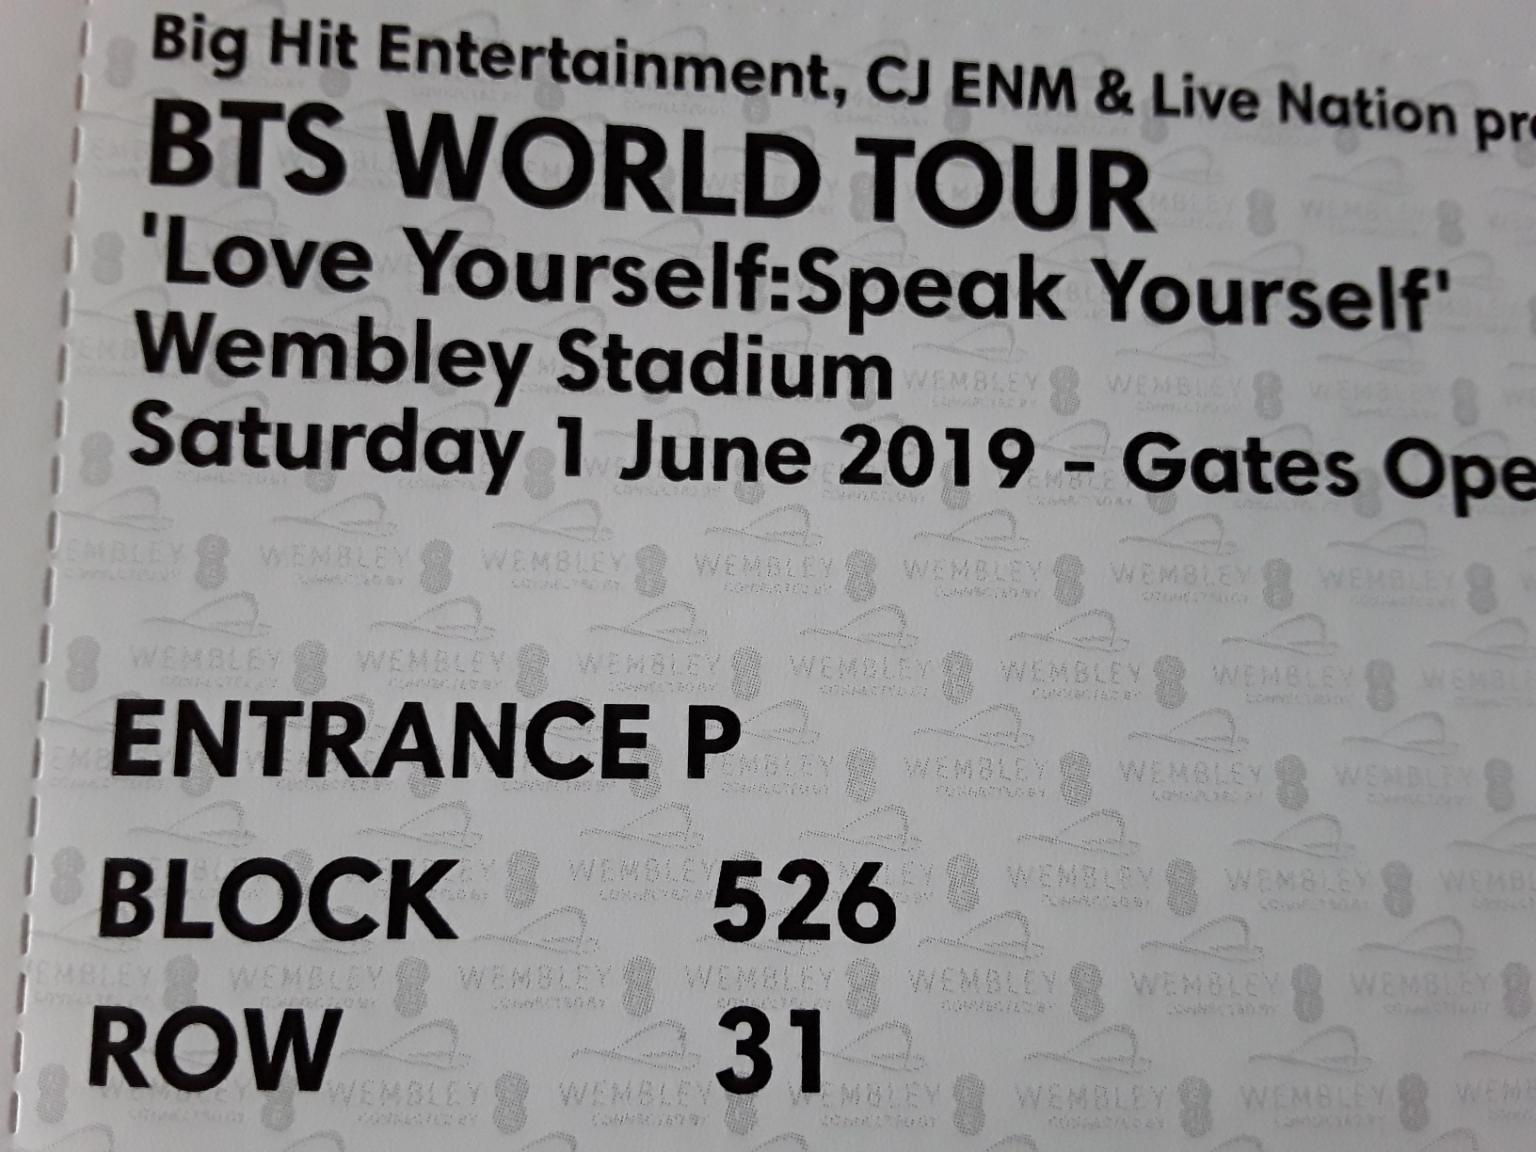 2 x BTS concert tickets Wembley London in WV14 Dudley for £150.00 for sale | Shpock1200 x 900